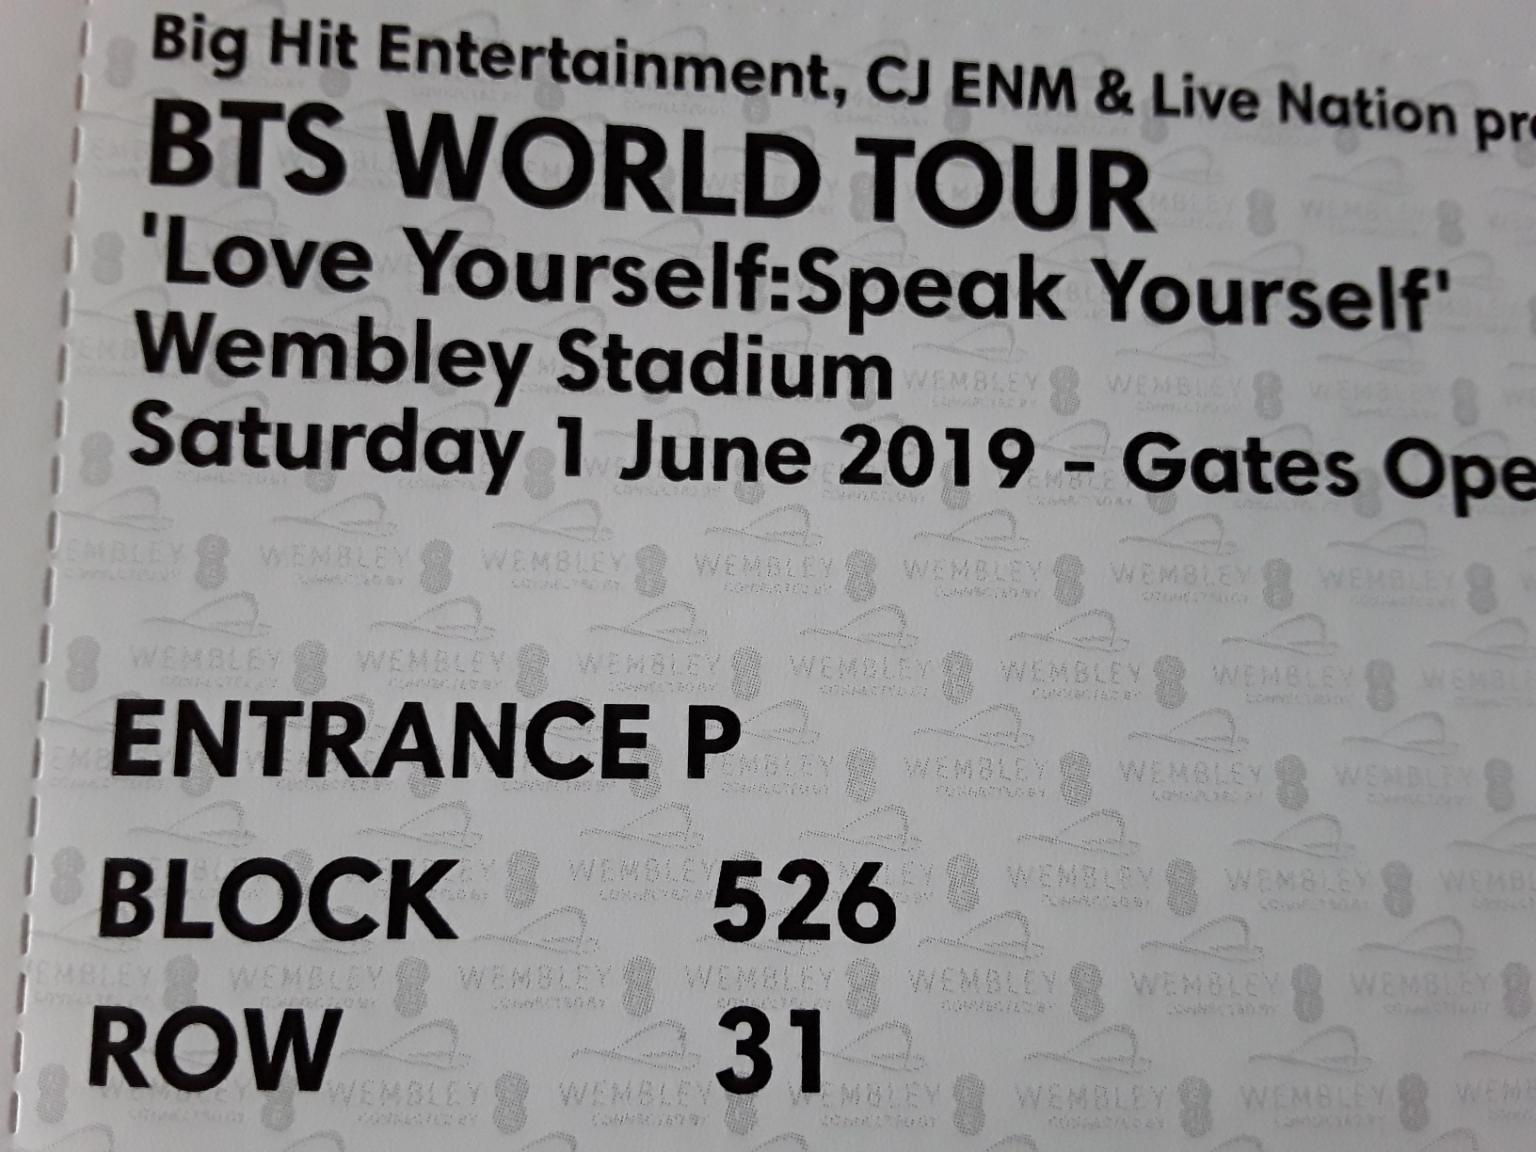 2 x BTS concert tickets Wembley London in WV14 Dudley for £150.00 for sale | Shpock1200 x 900